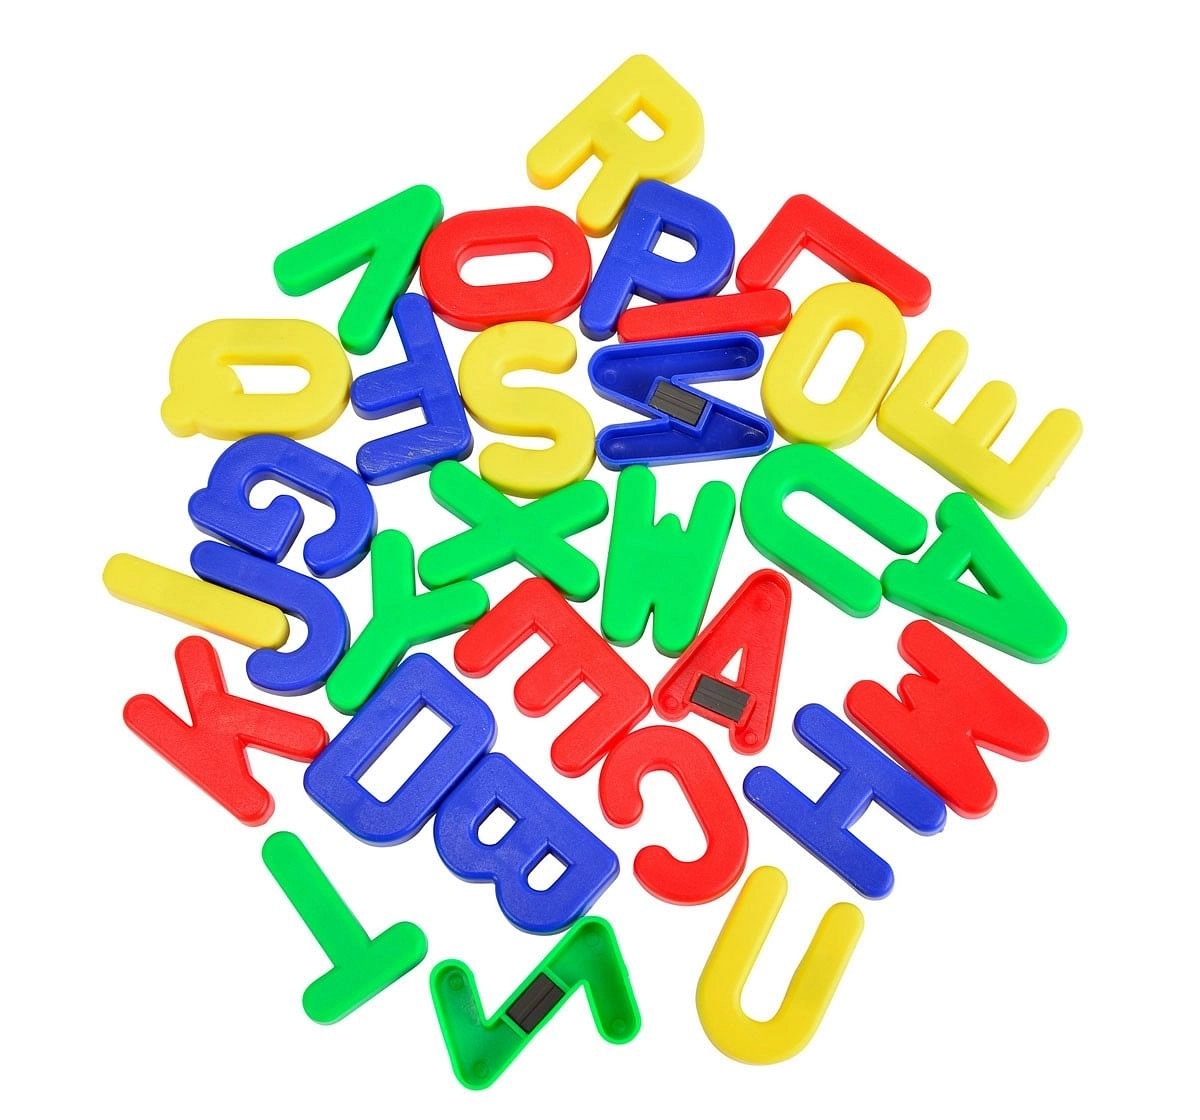 Simba Art and Fun Magnetic Capital Letters Multicolor 3Y+